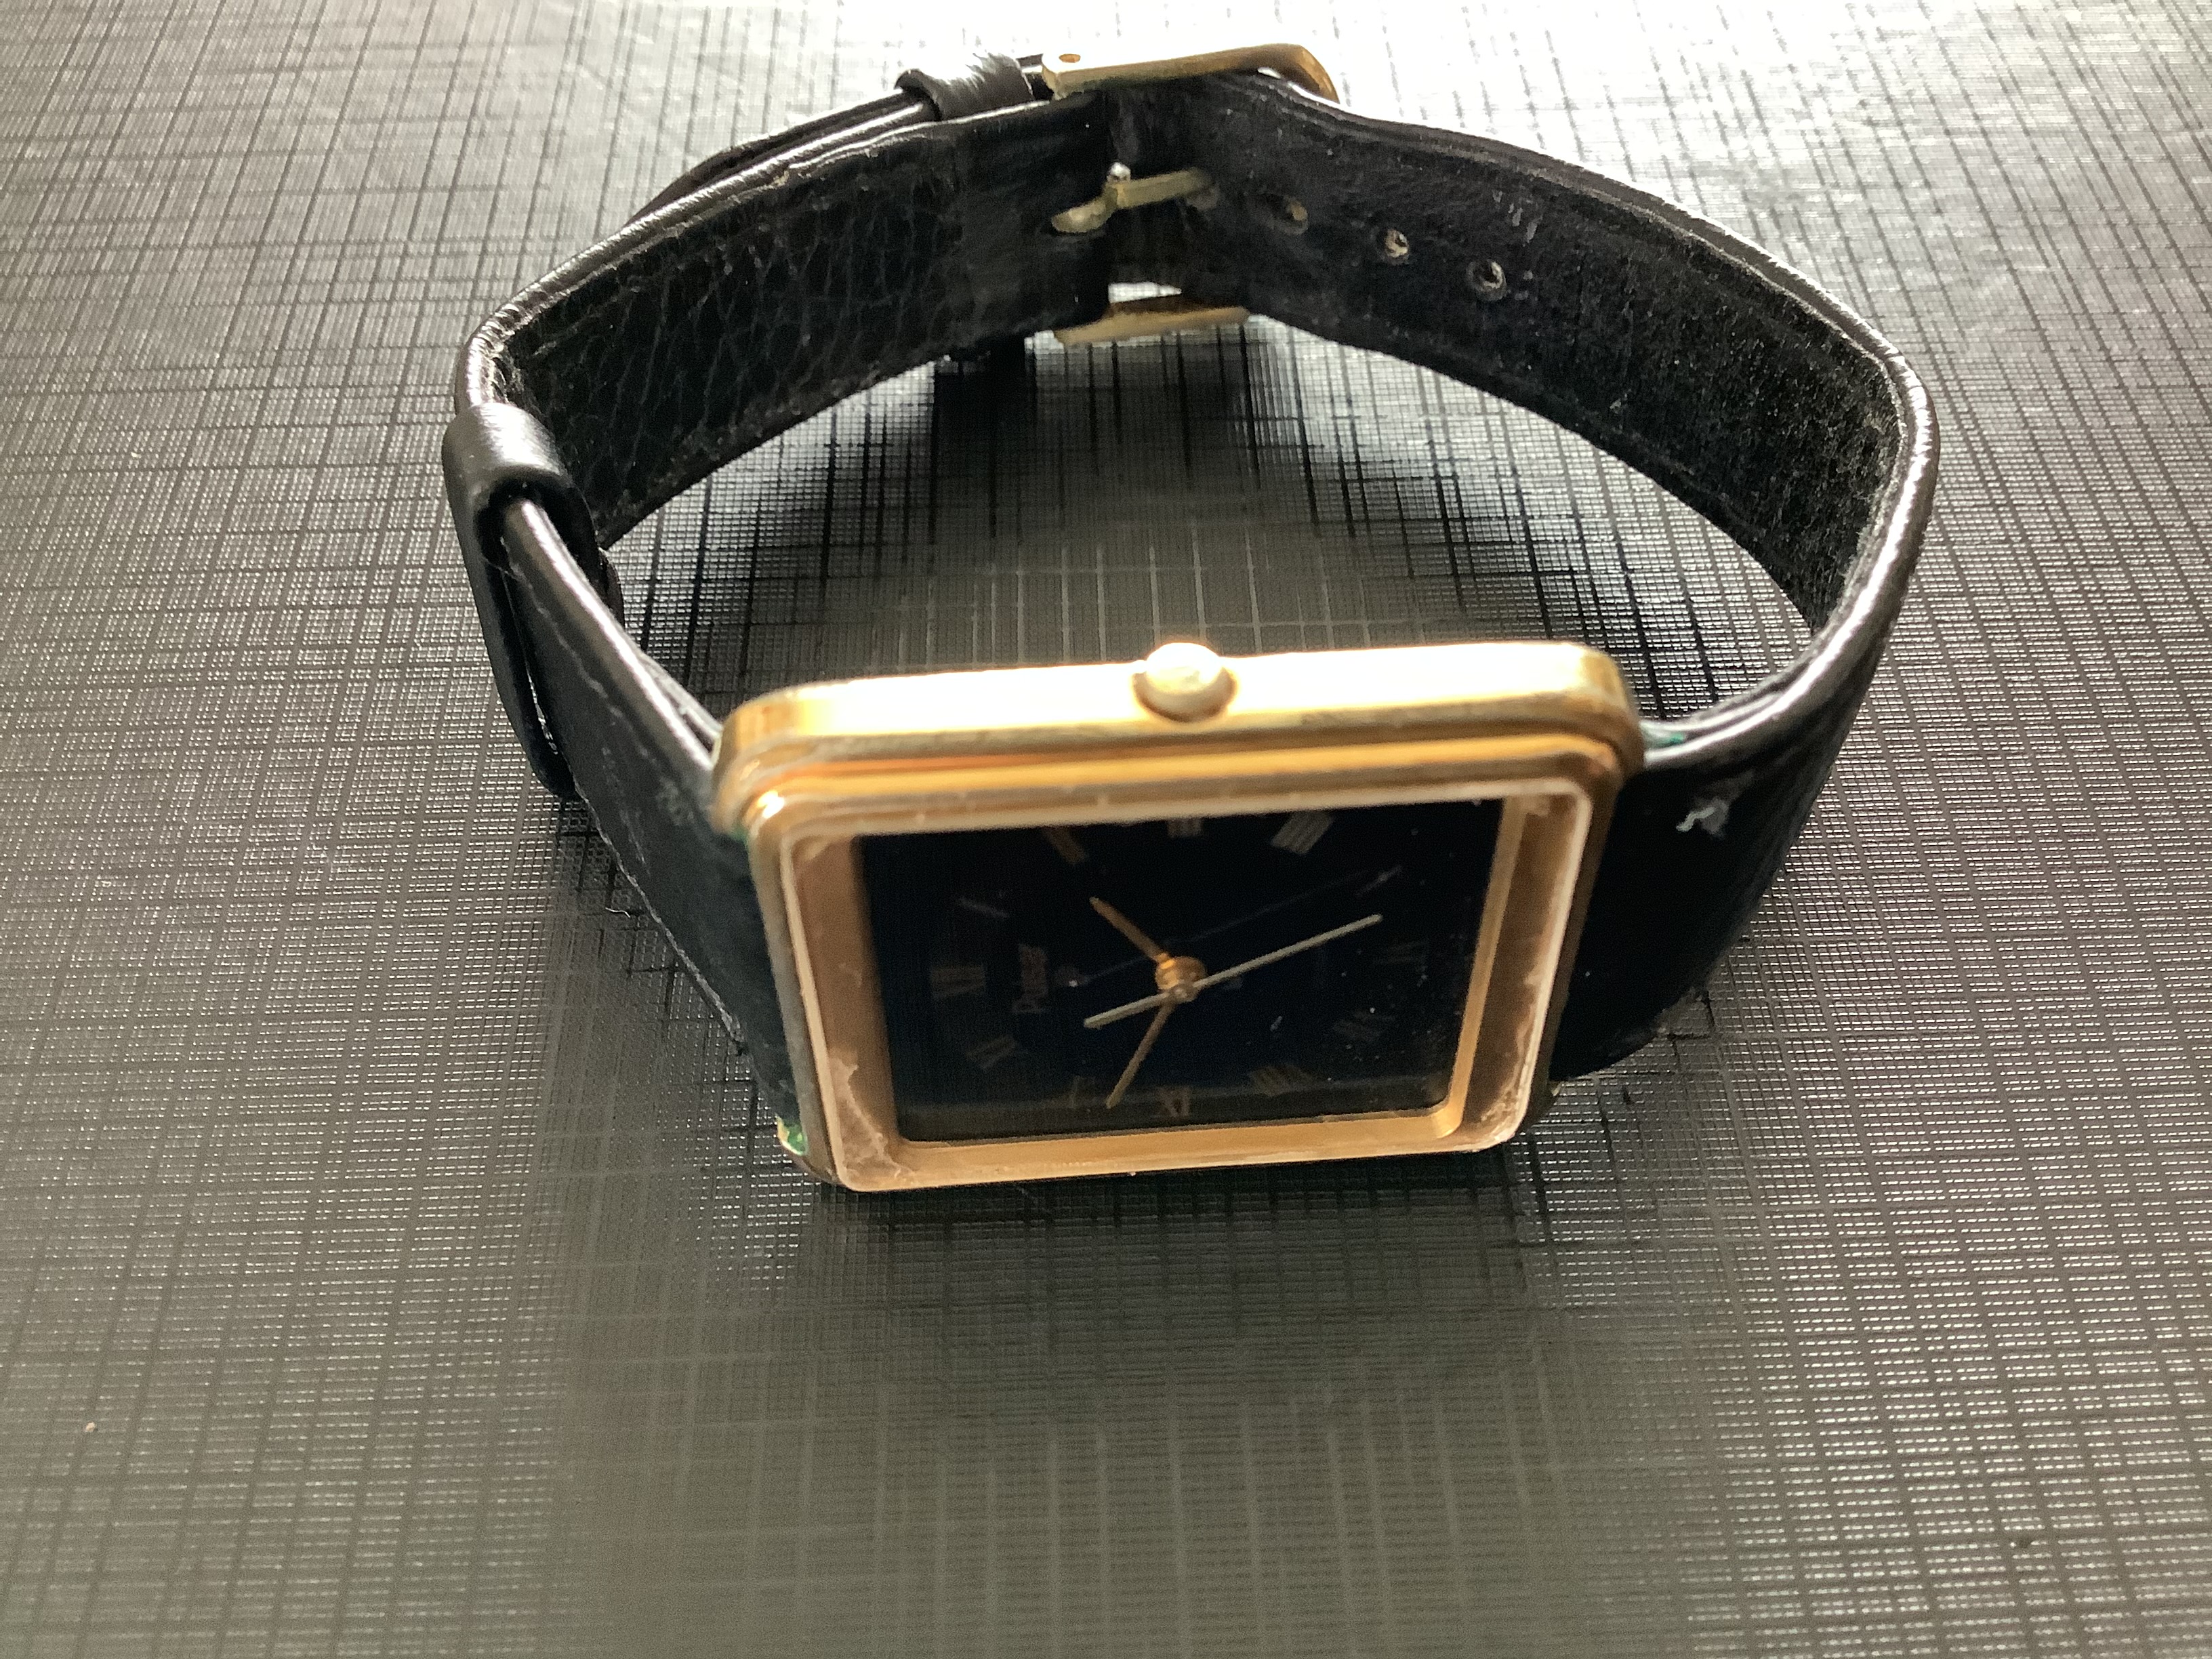 Gorgeous 1990 Pulsar Gold Plated Wristwatch (GS 142) - Image 2 of 6